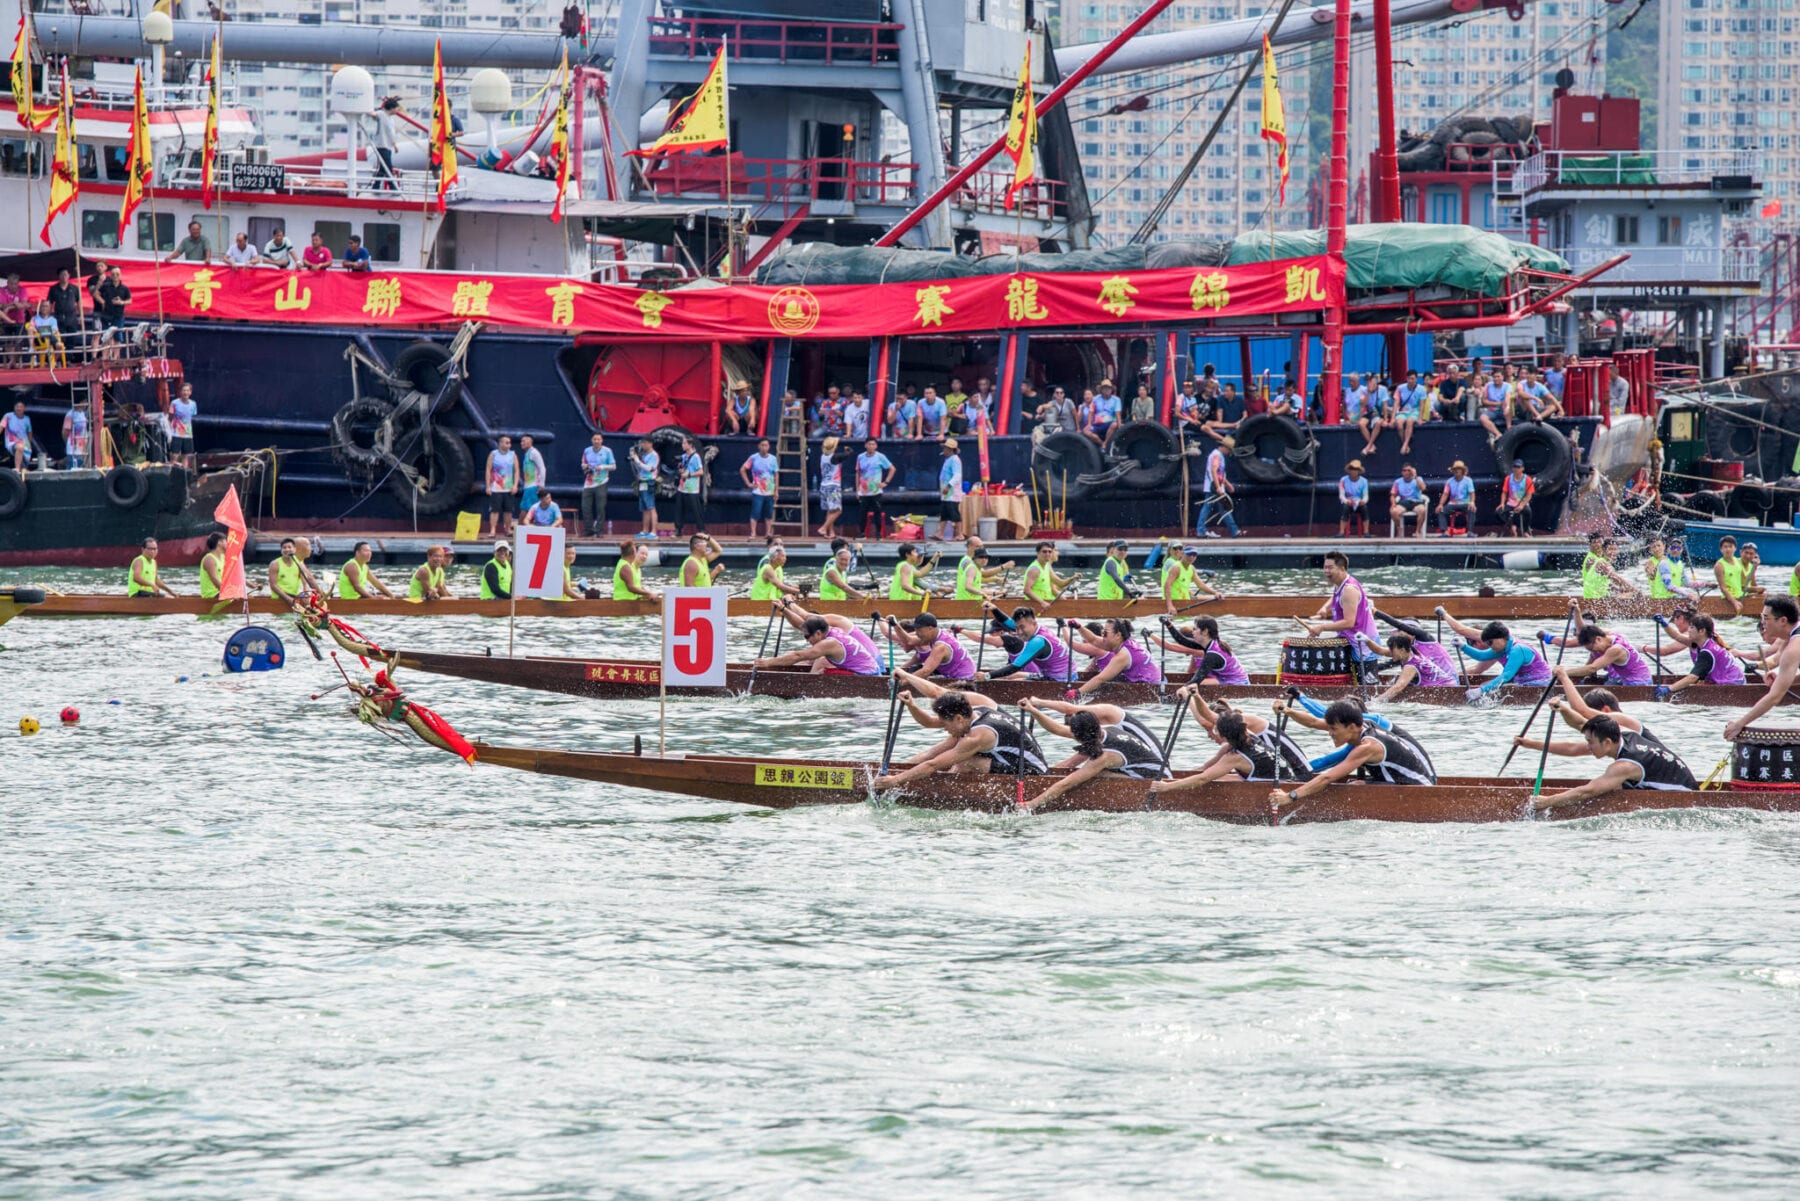 10 best ways to celebrate the dragon boat festival with your kids